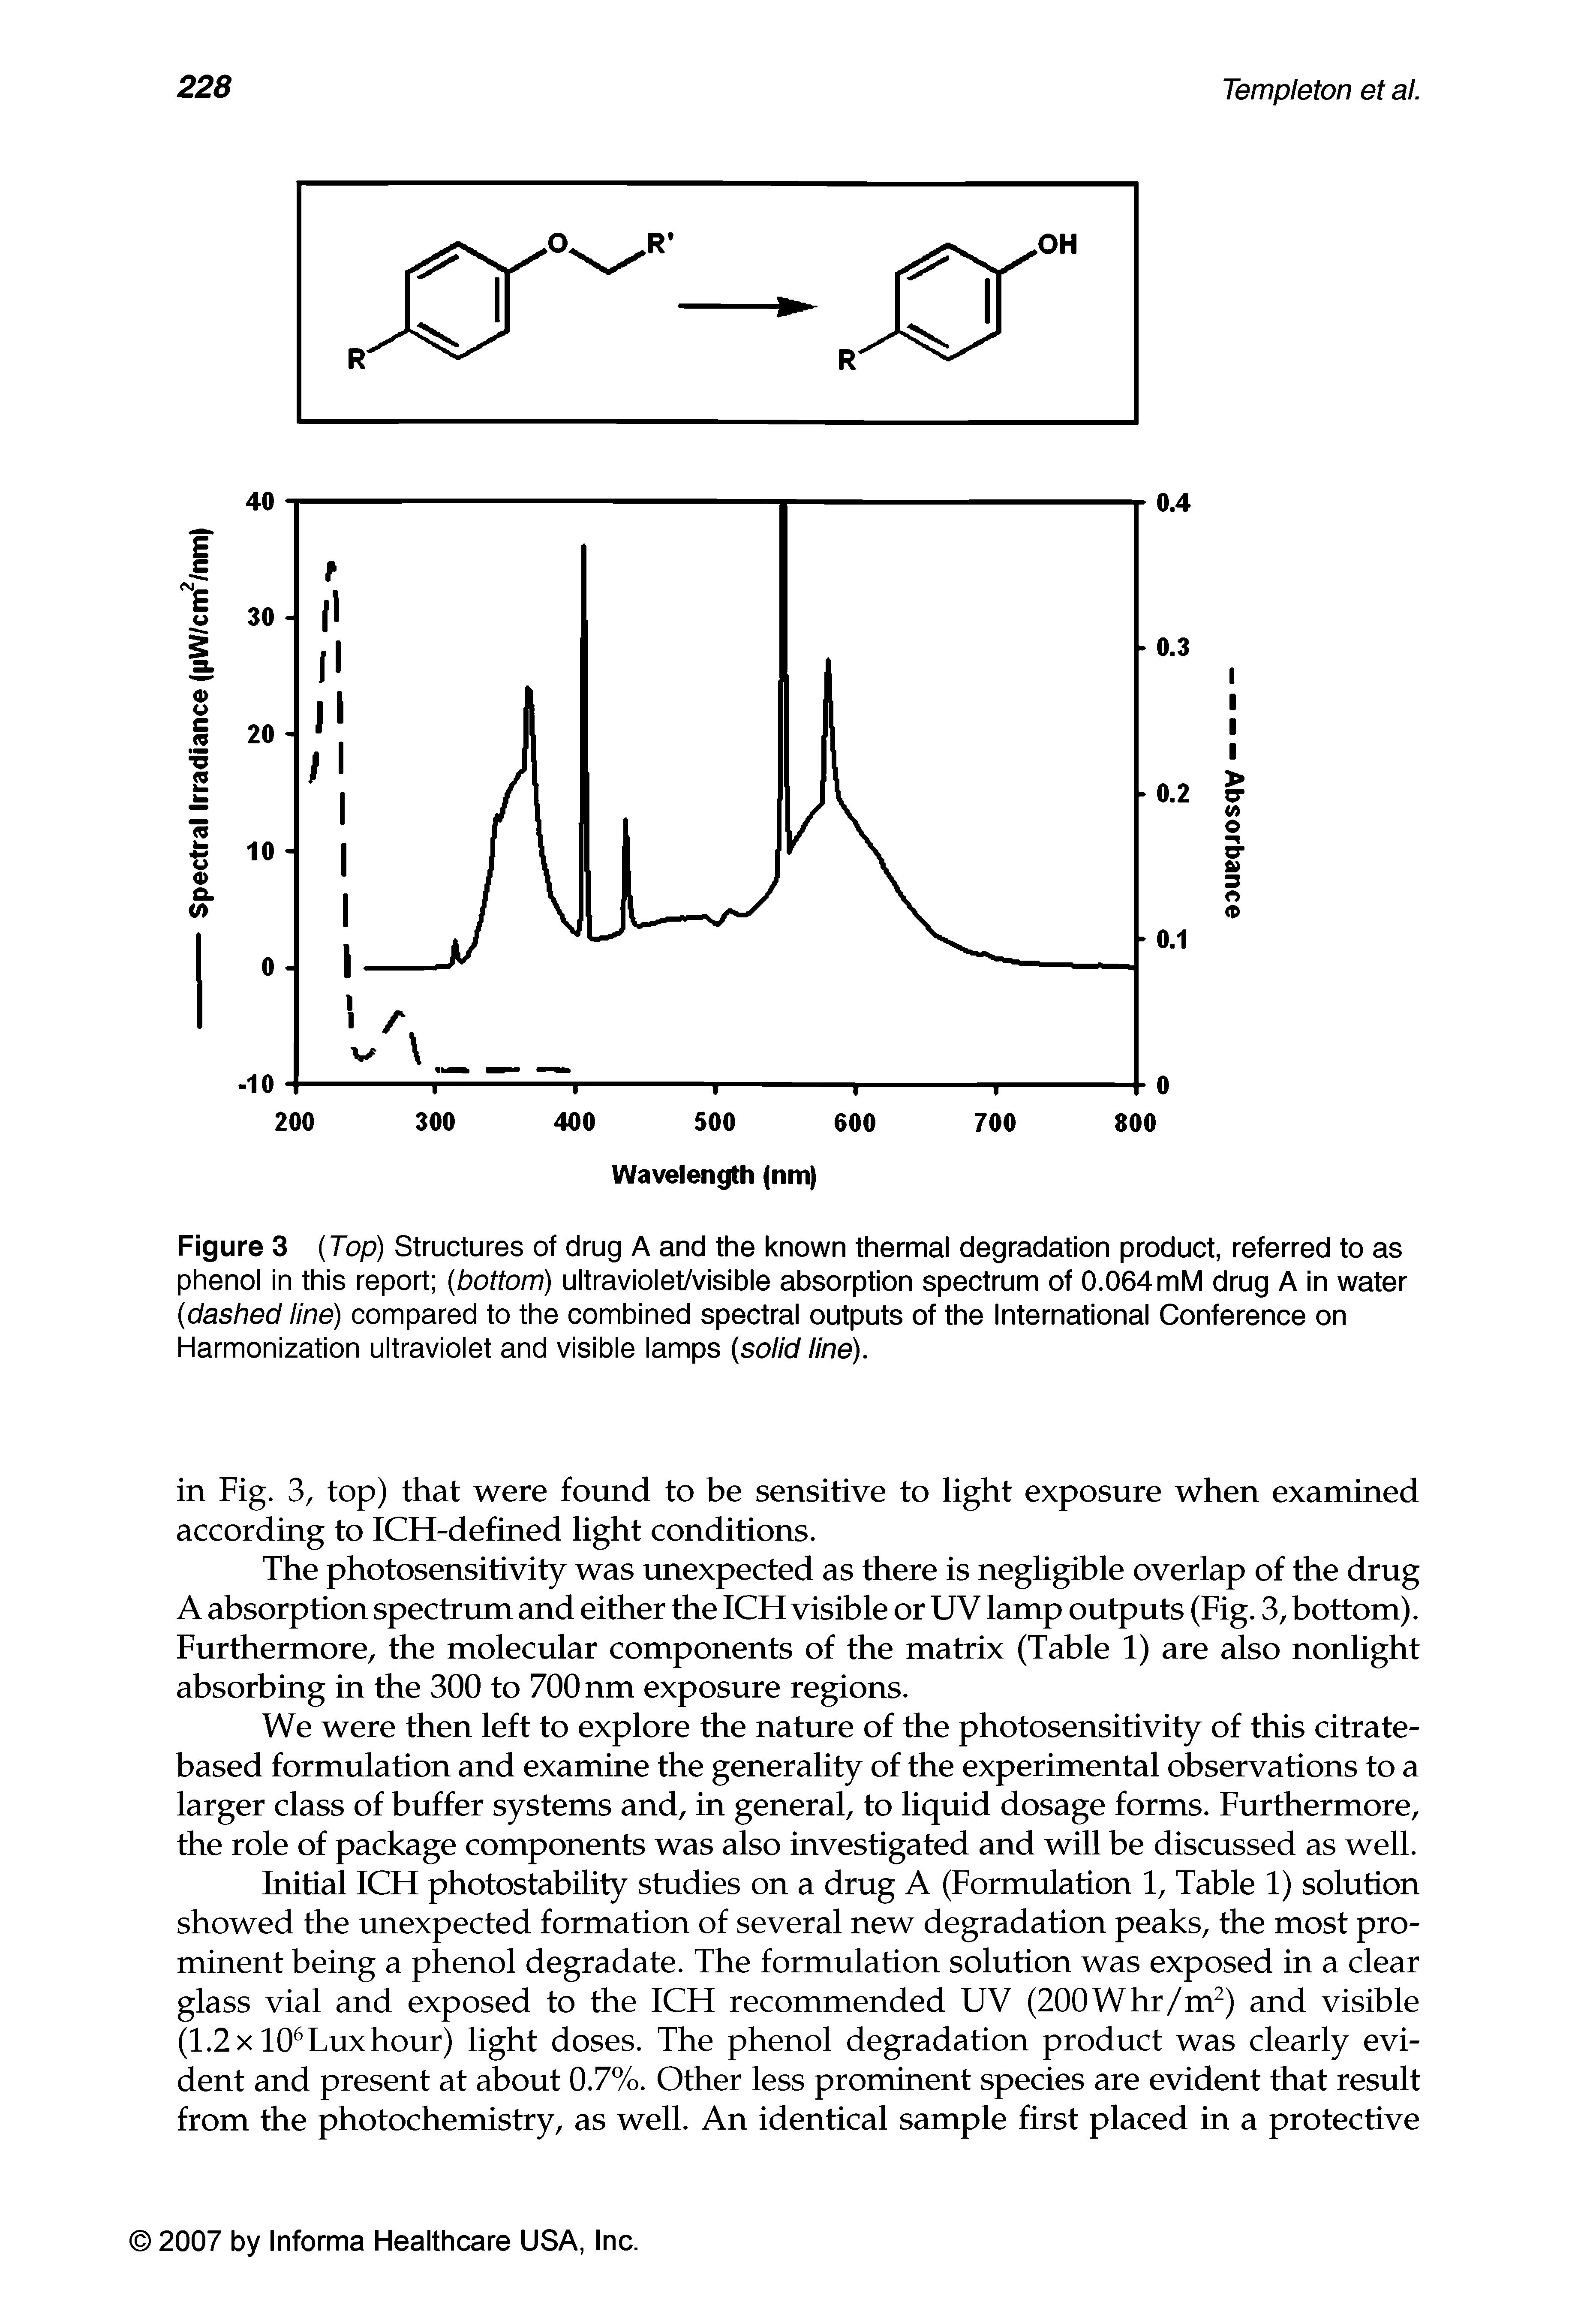 Figure 3 (Top) Structures of drug A and the known thermal degradation product, referred to as phenol in this report (bottom) ultraviolet/visible absorption spectrum of 0.064 mM drug A in water (dashed line) compared to the combined spectral outputs of the International Conference on Harmonization ultraviolet and visible lamps (solid line).